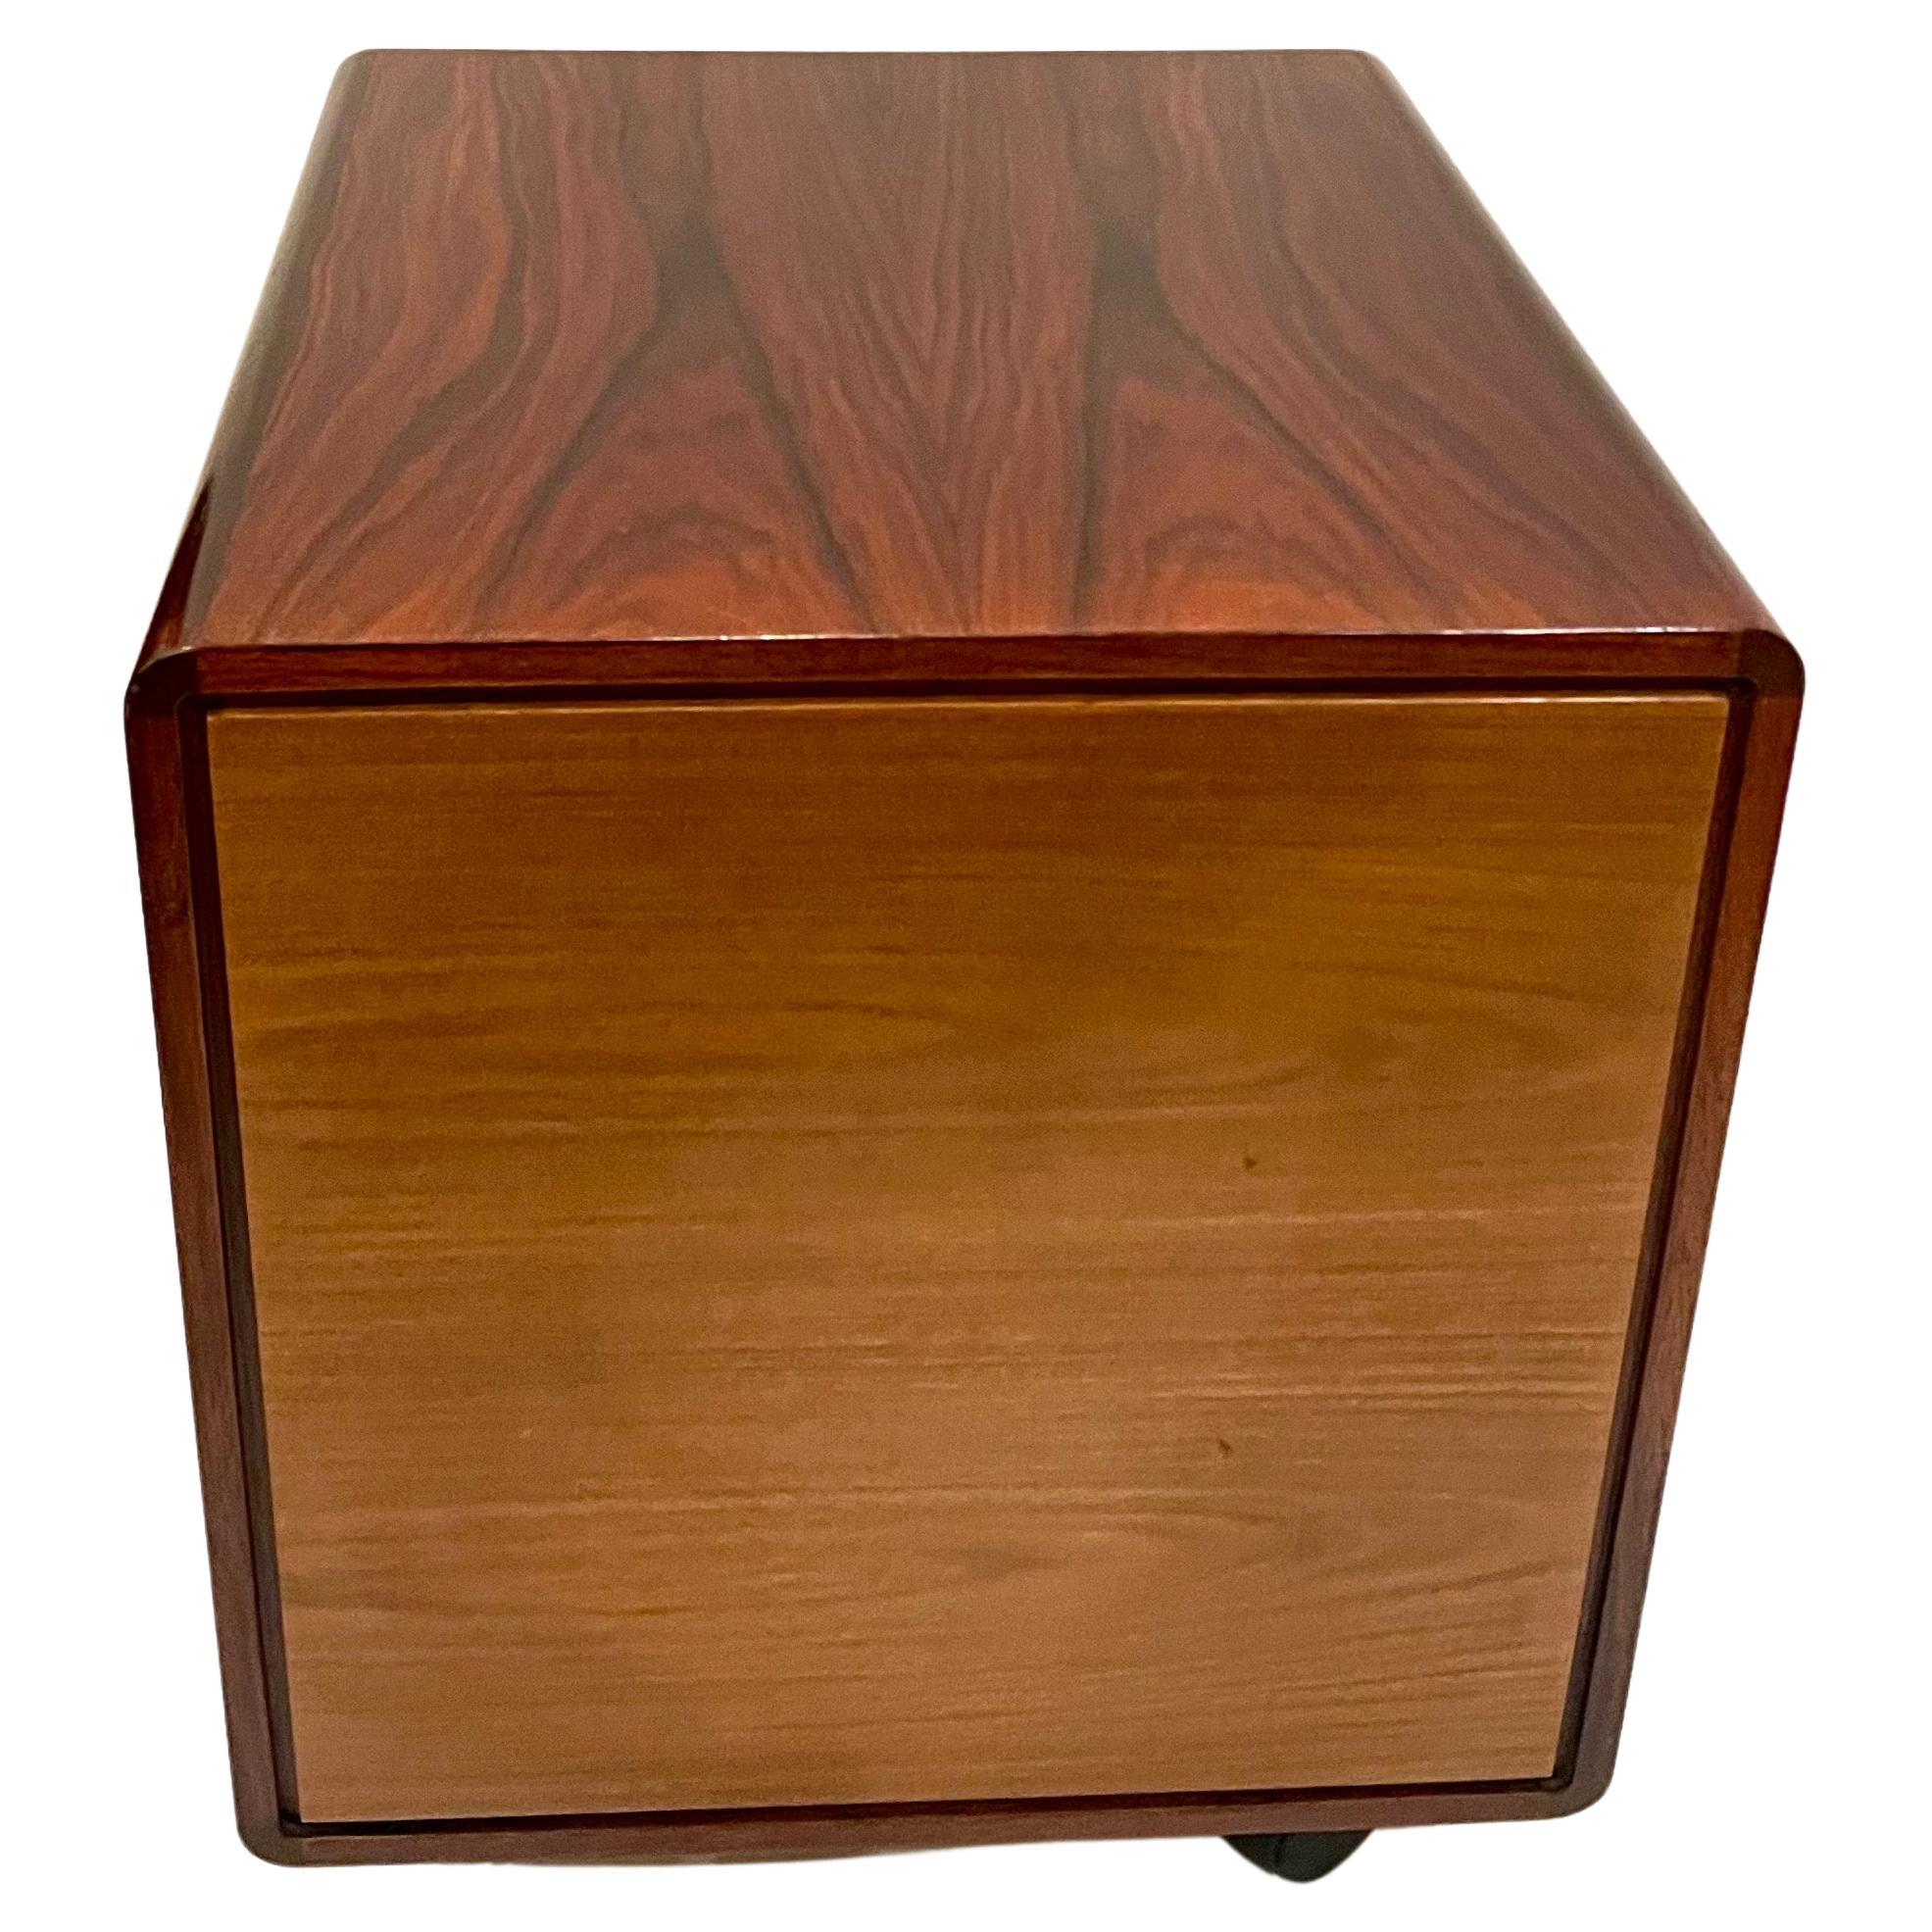 Post Modern Rosewood File Cabinet by Sibast Mobler Design by Posborg & Meyhoff In Excellent Condition For Sale In San Diego, CA